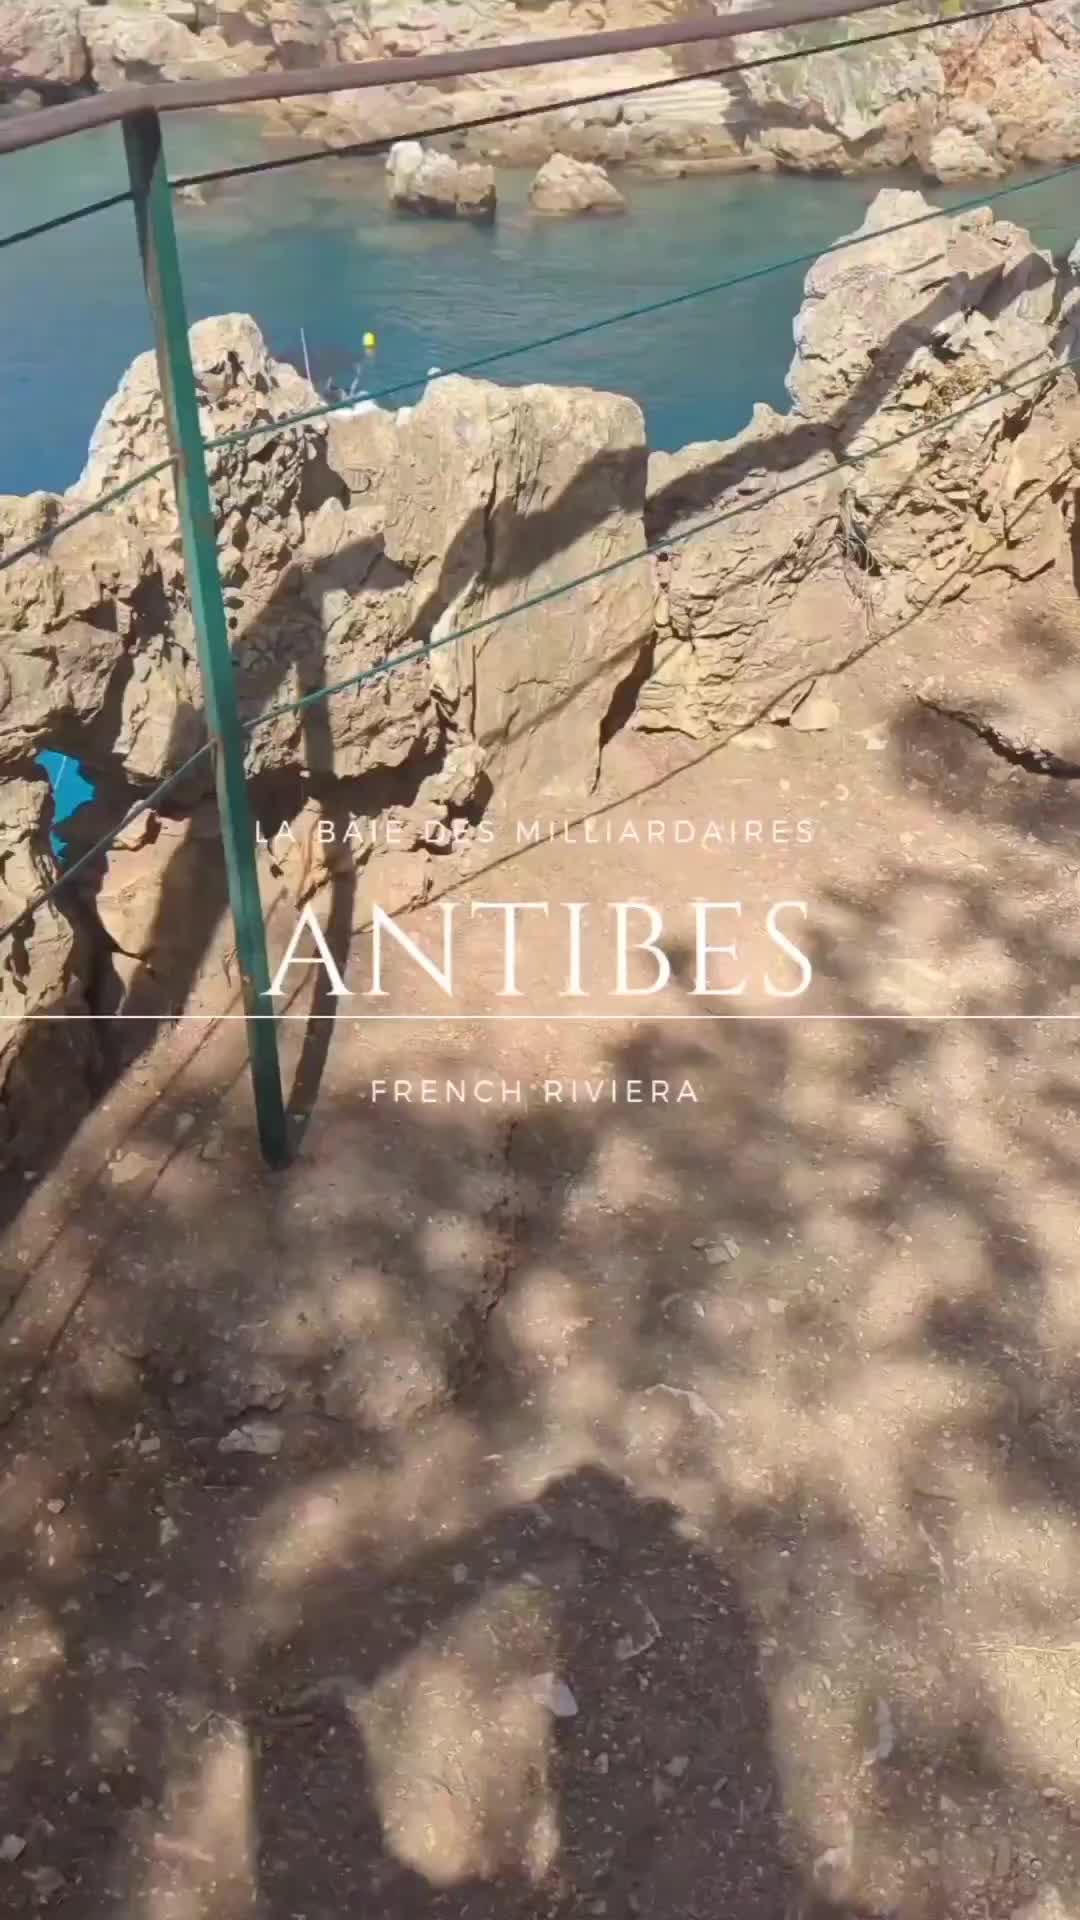 Explore the Stunning Baie des Milliardaires in Antibes